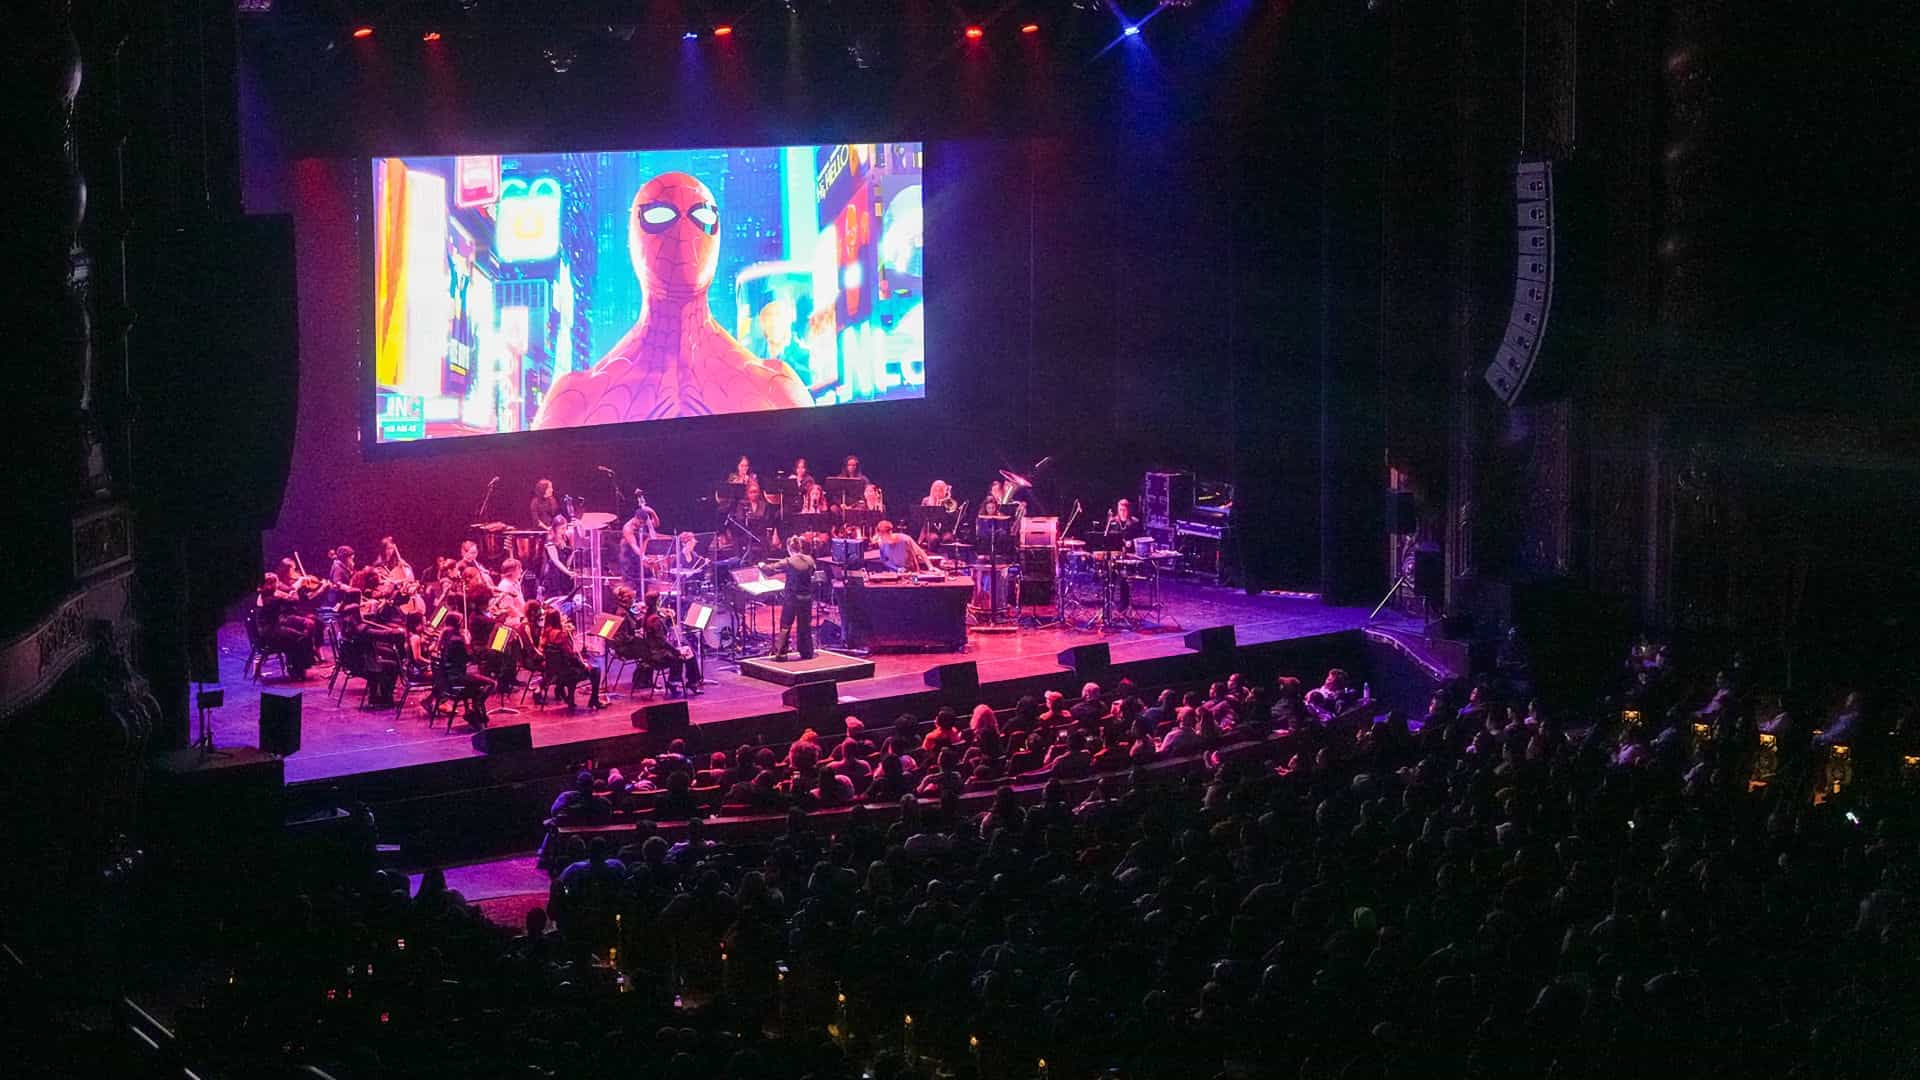 Spider-Man: Across The Spider-Verse - Live In Concert